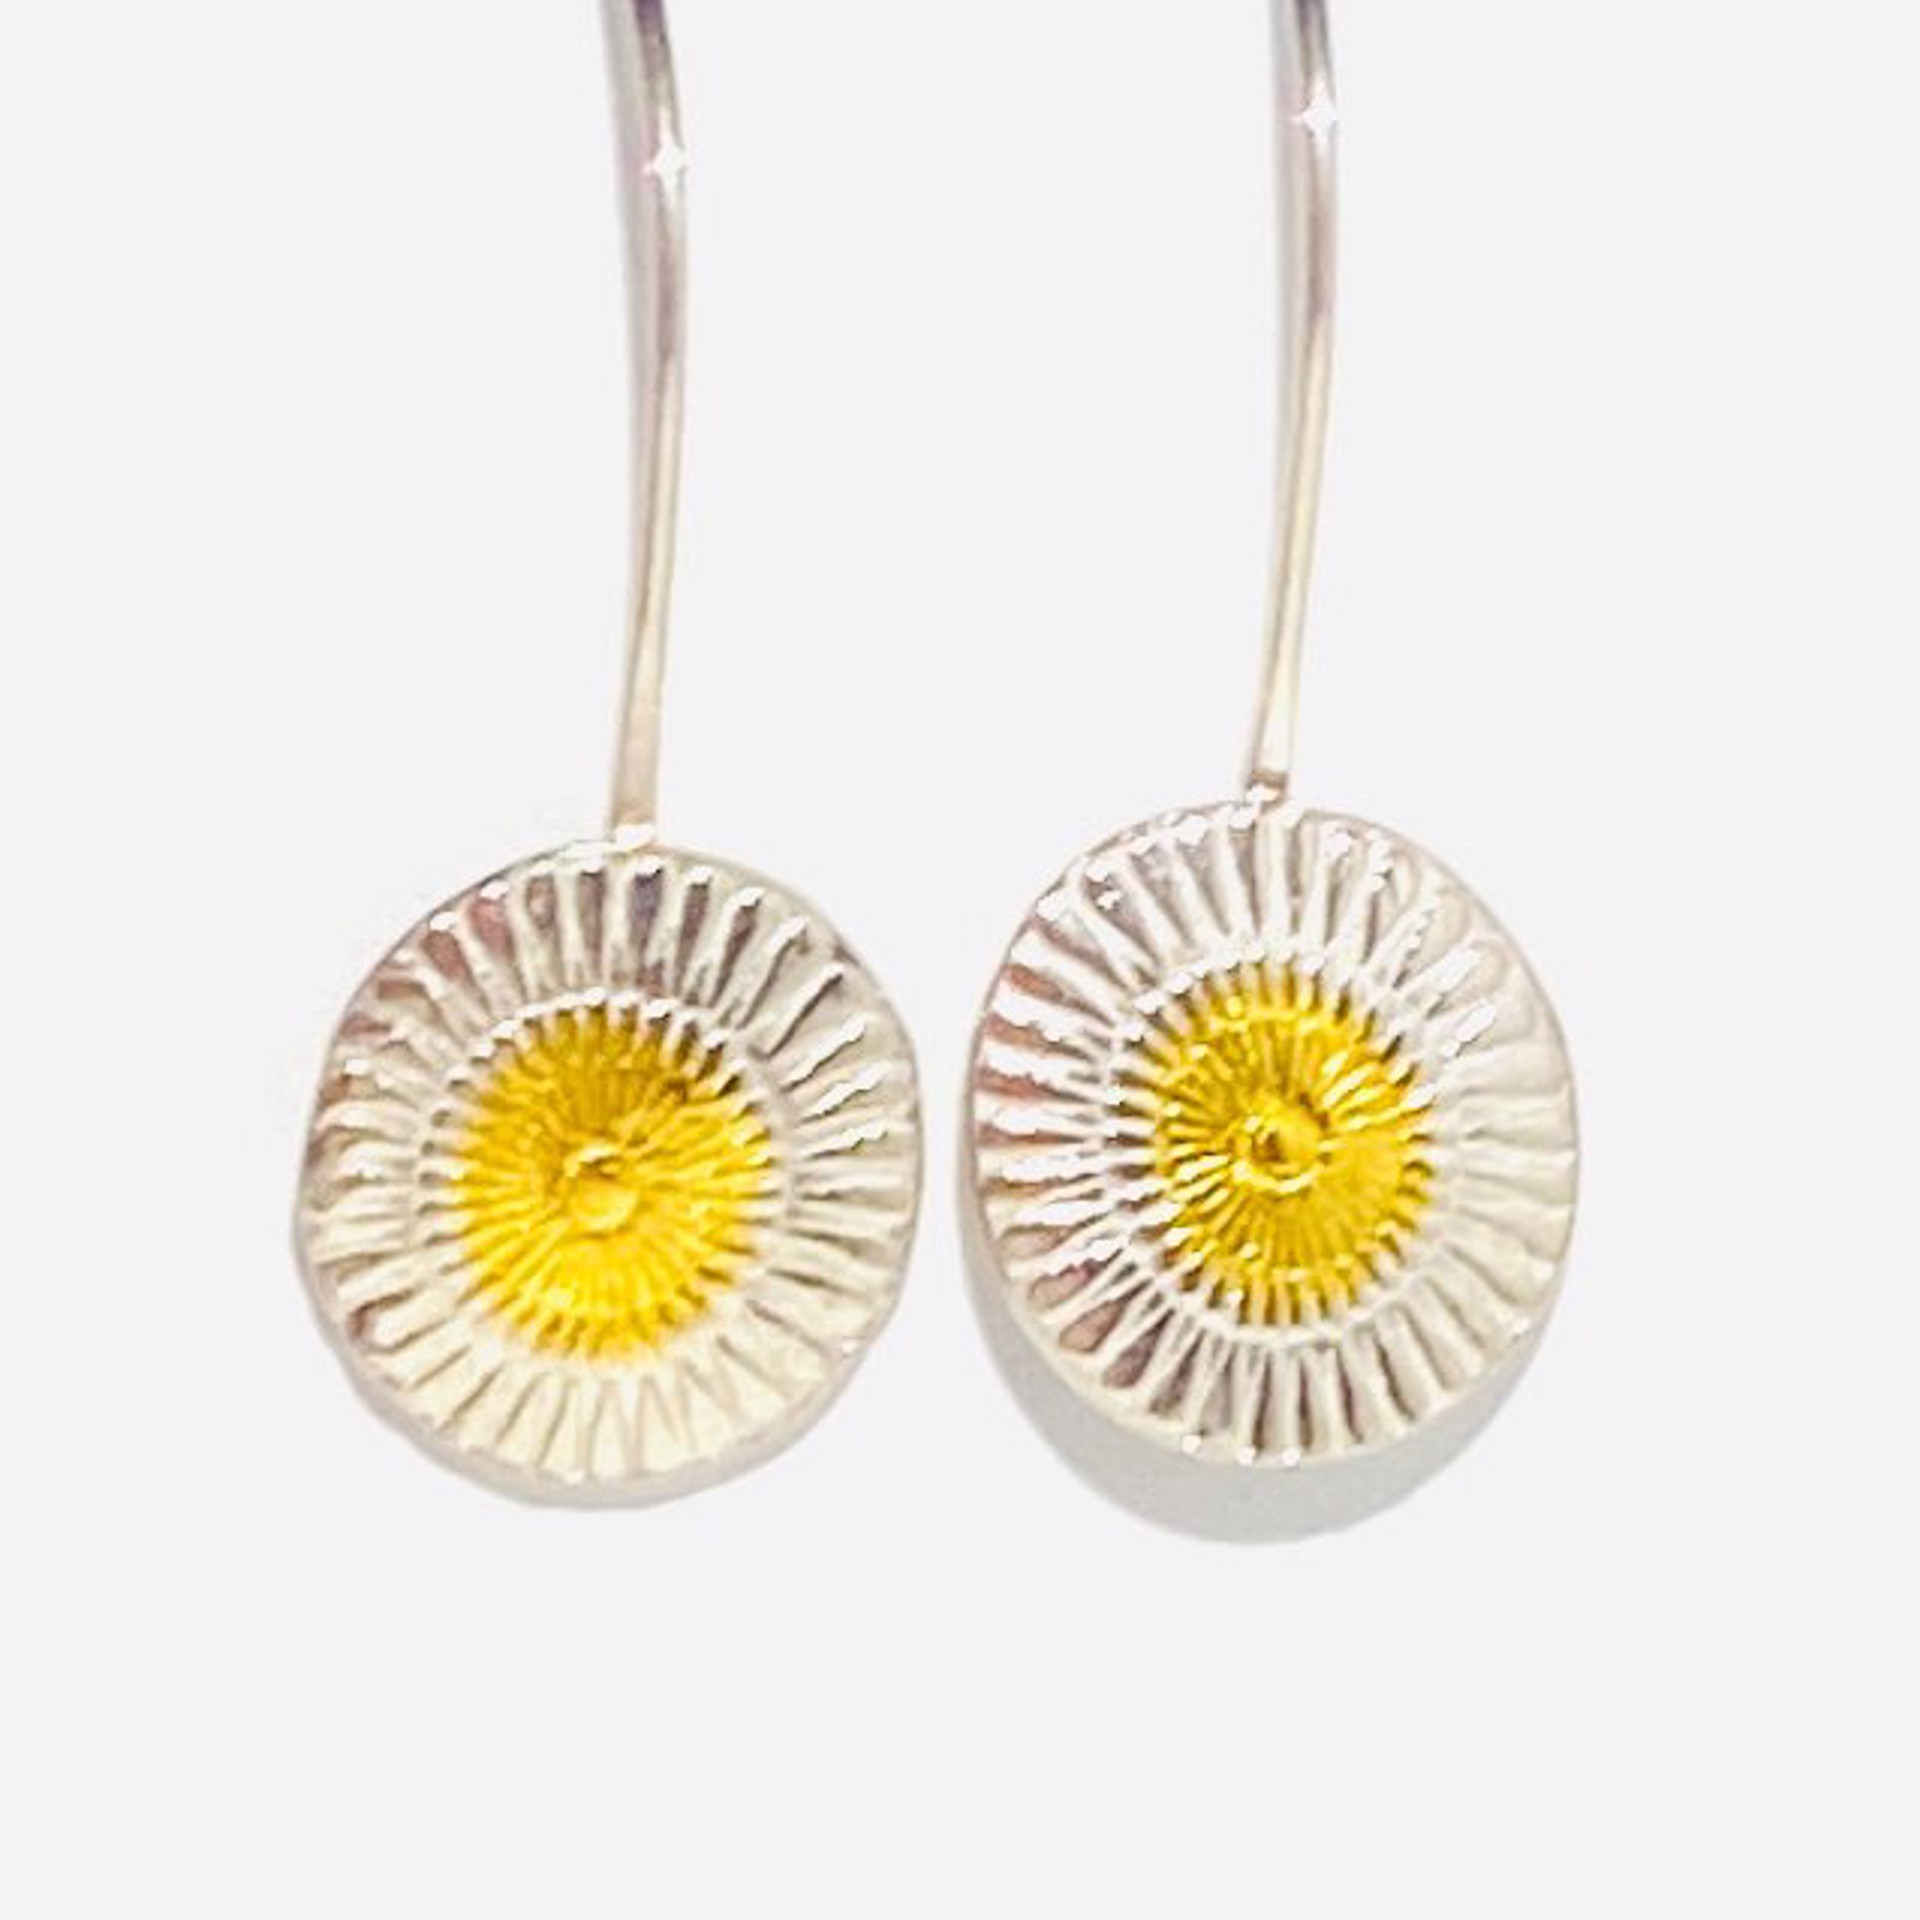 Keum-boo Fine Silver and Gold Circle Earrings KH23-8 by Karen Hakim